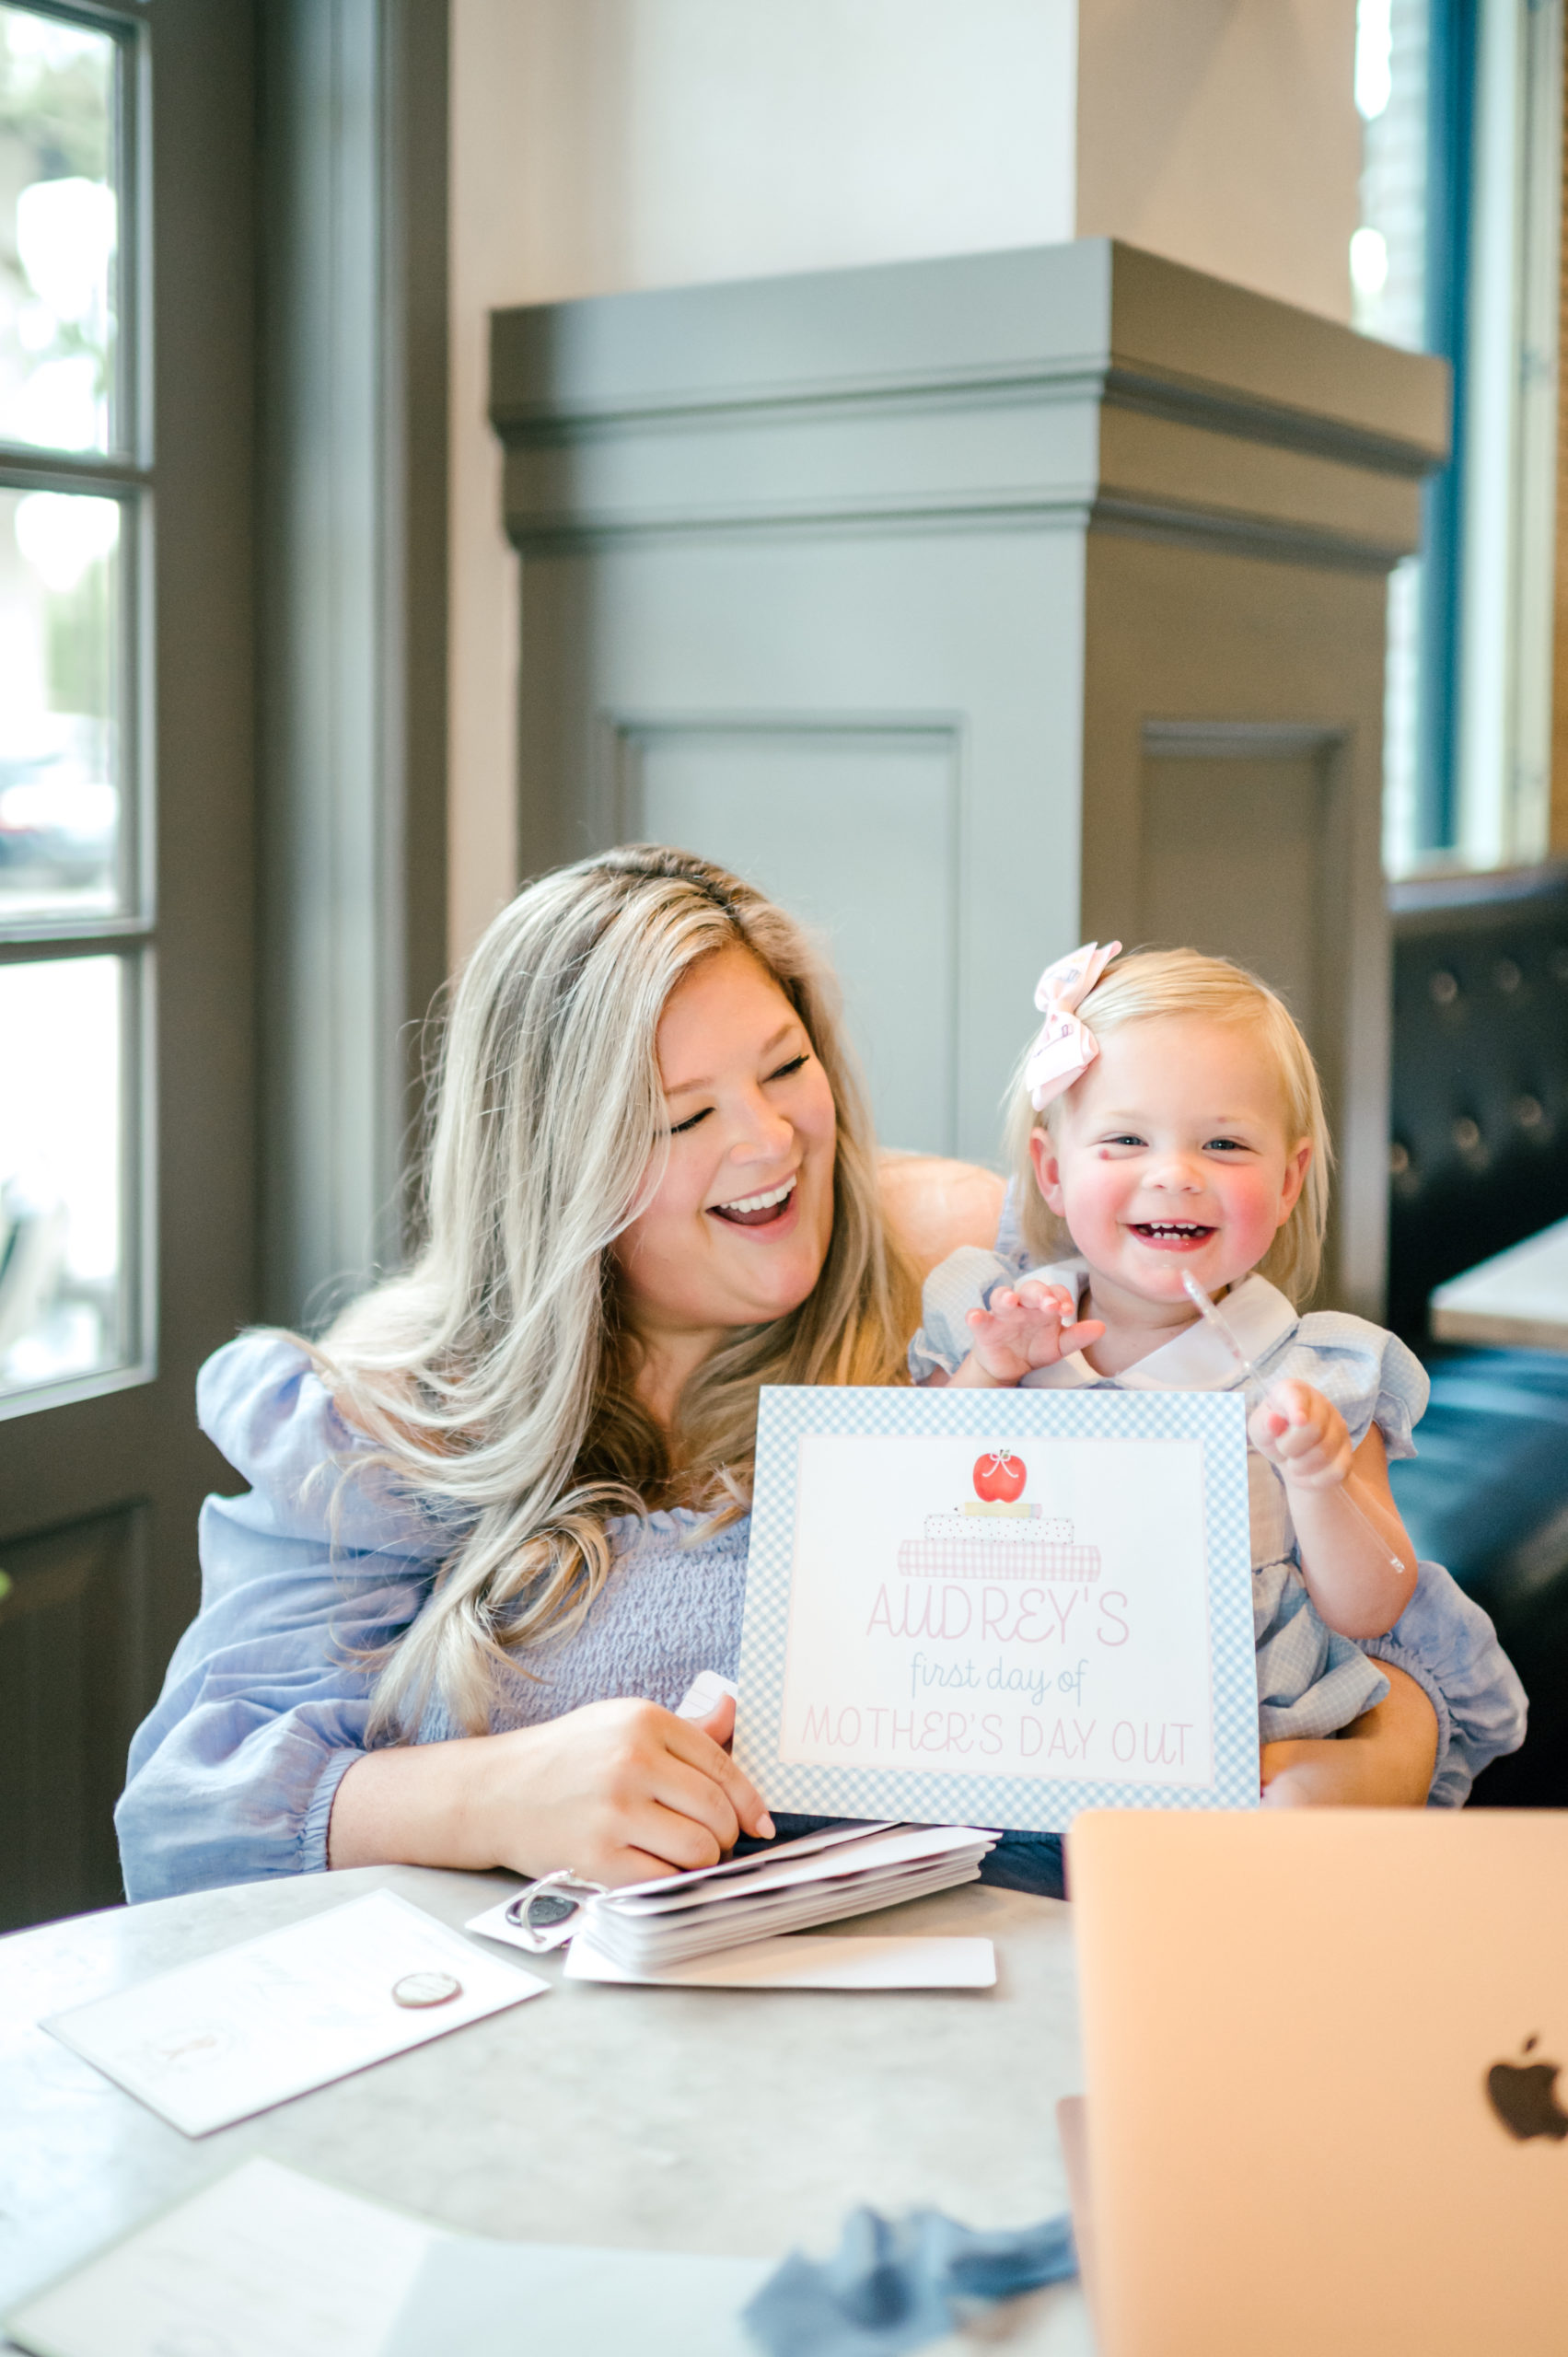 Woman holding baby showing off a milestone card labeled "Audreys first day of mothers day out" for brand photoshoot